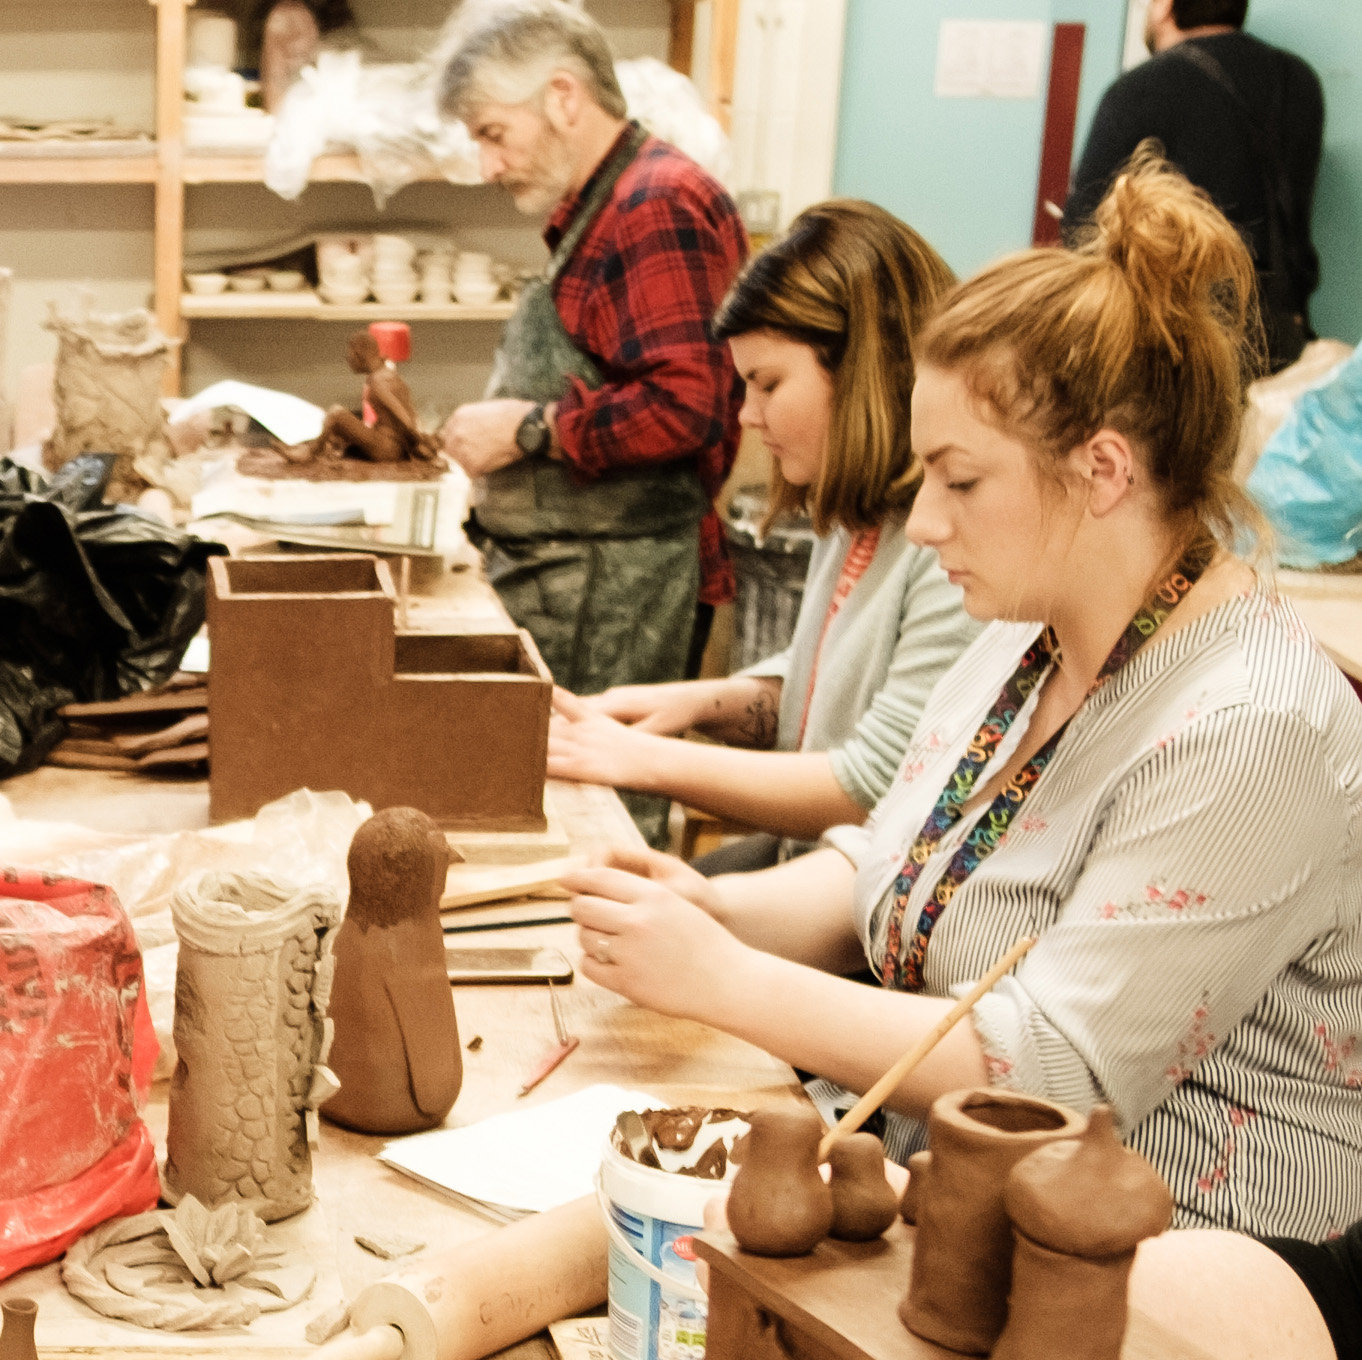 Students sitting in a workshop, hand modelling ceramics